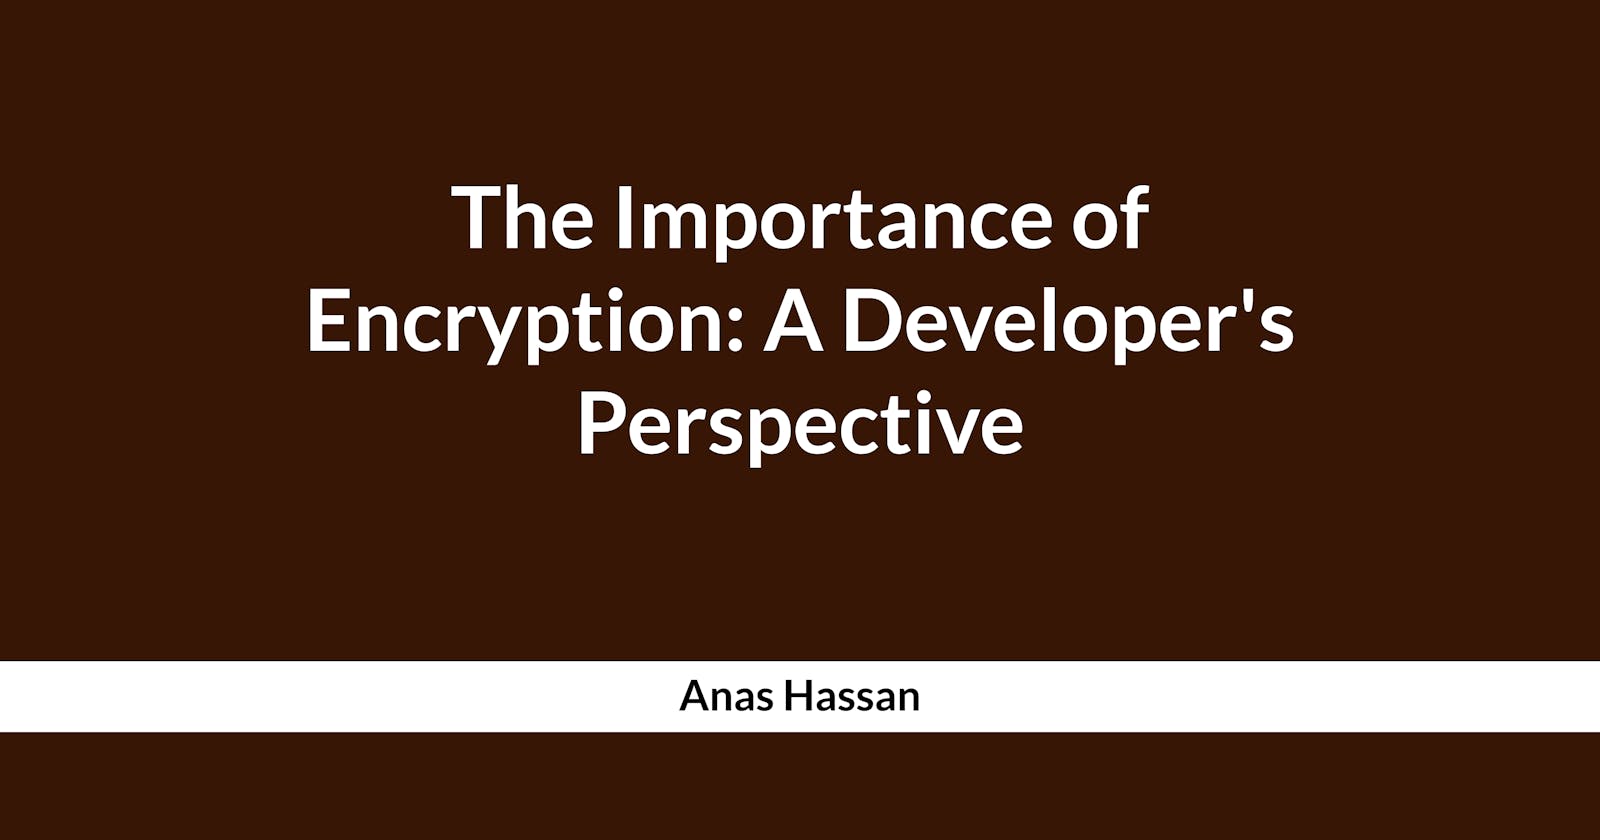 The Importance of Encryption: A Developer's Perspective